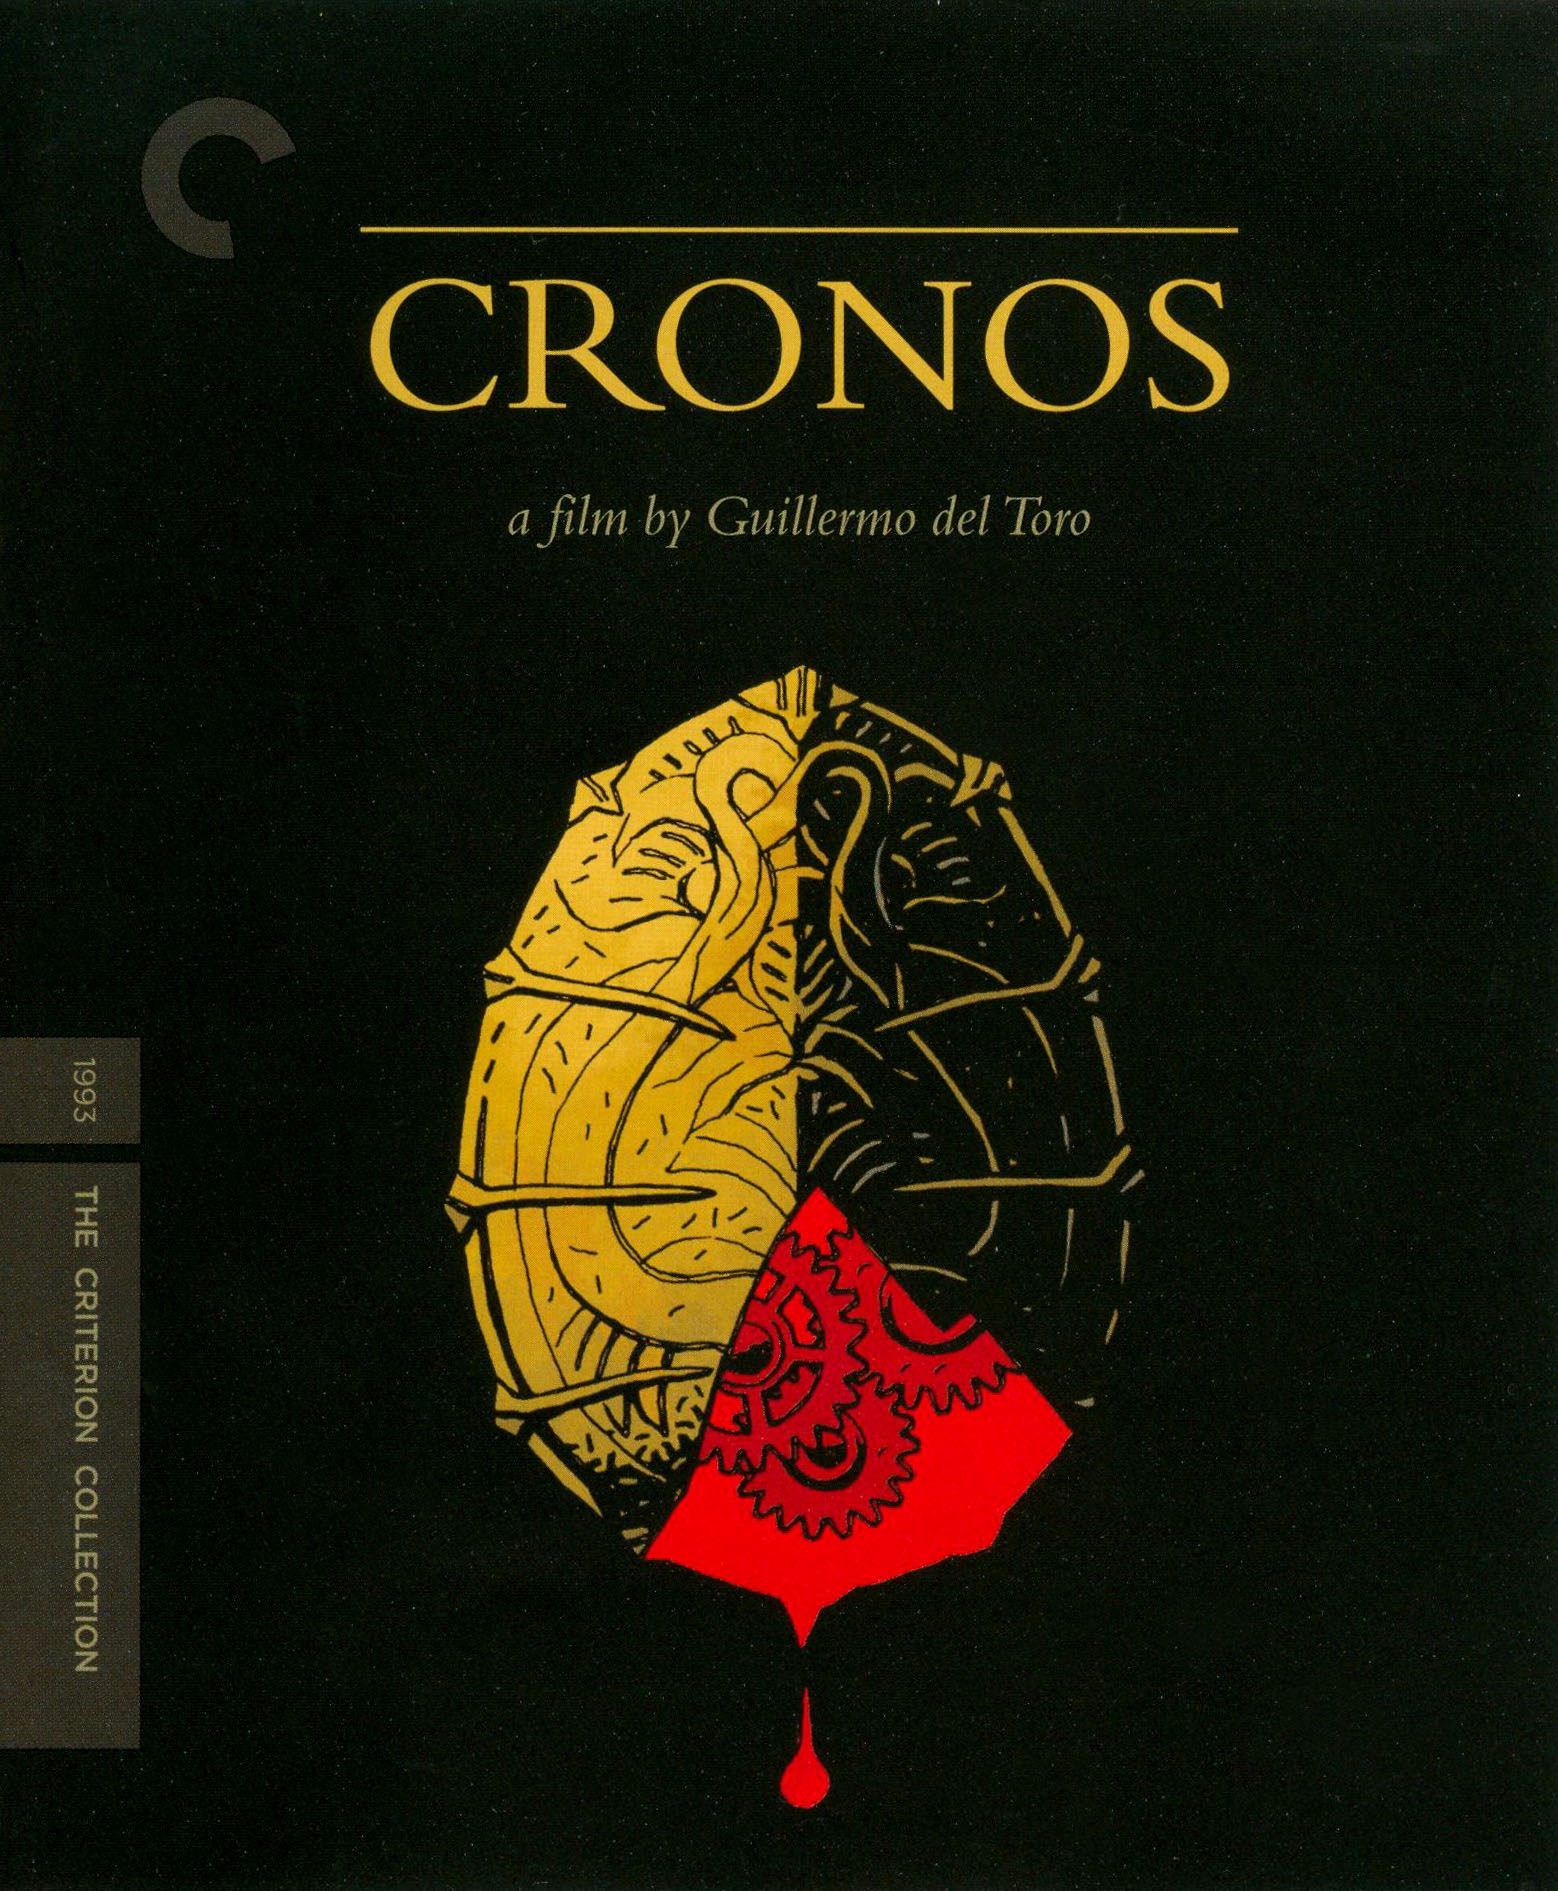 Cronos [Criterion Collection] [Blu-ray] [1993] - Best Buy